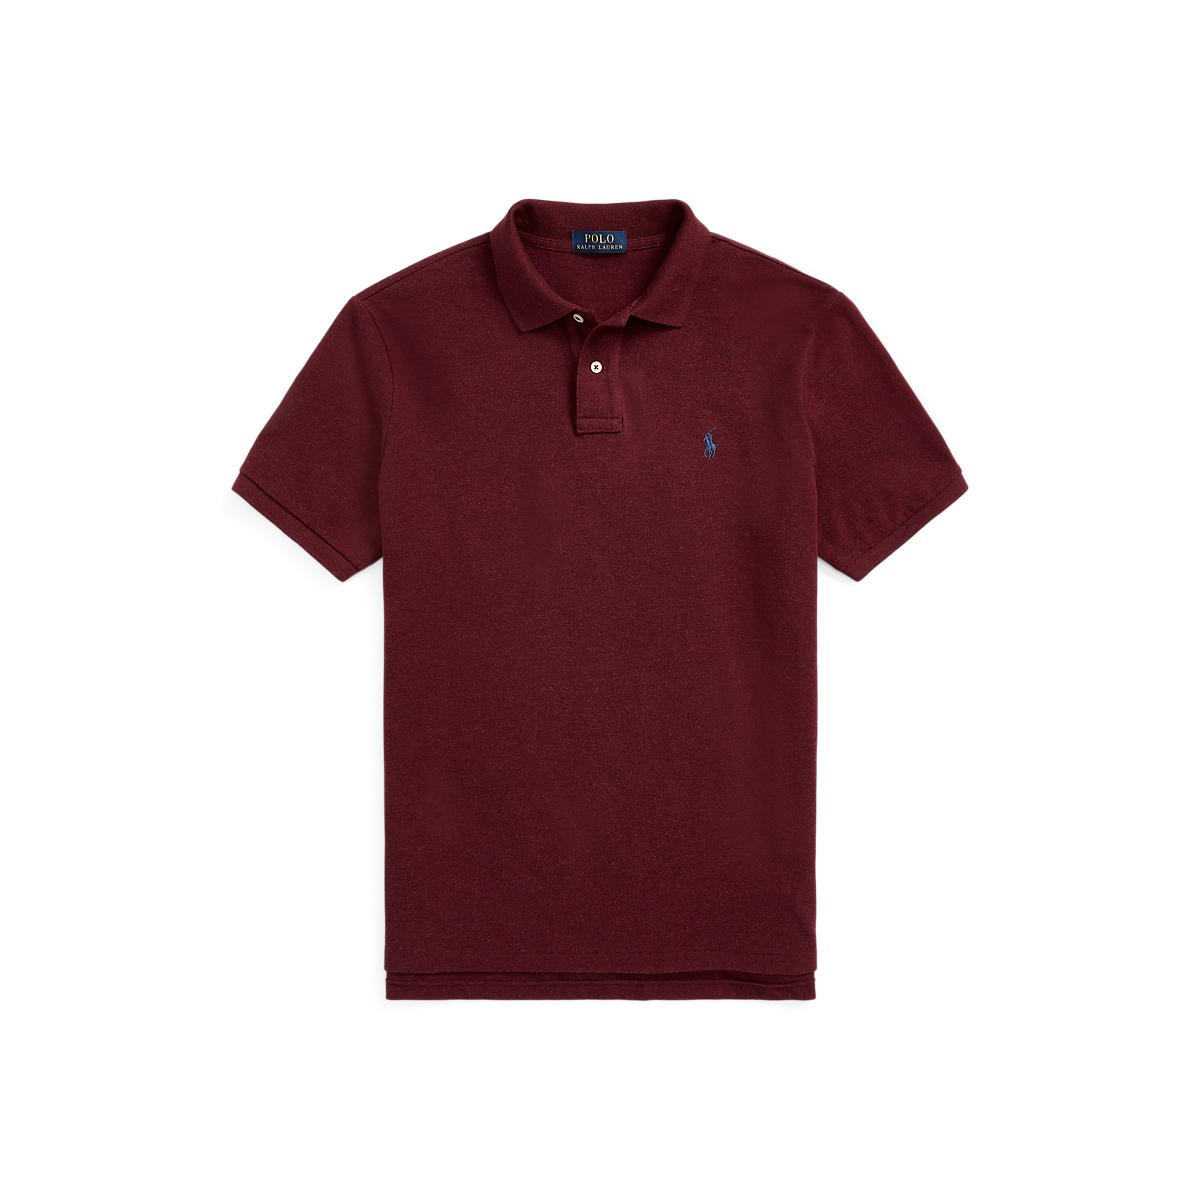 710534735343 Polo Ralph Lauren Classic Fit Mesh Polo Shirt Spring Wine Heather, P5,565 from P7,950.jpeg